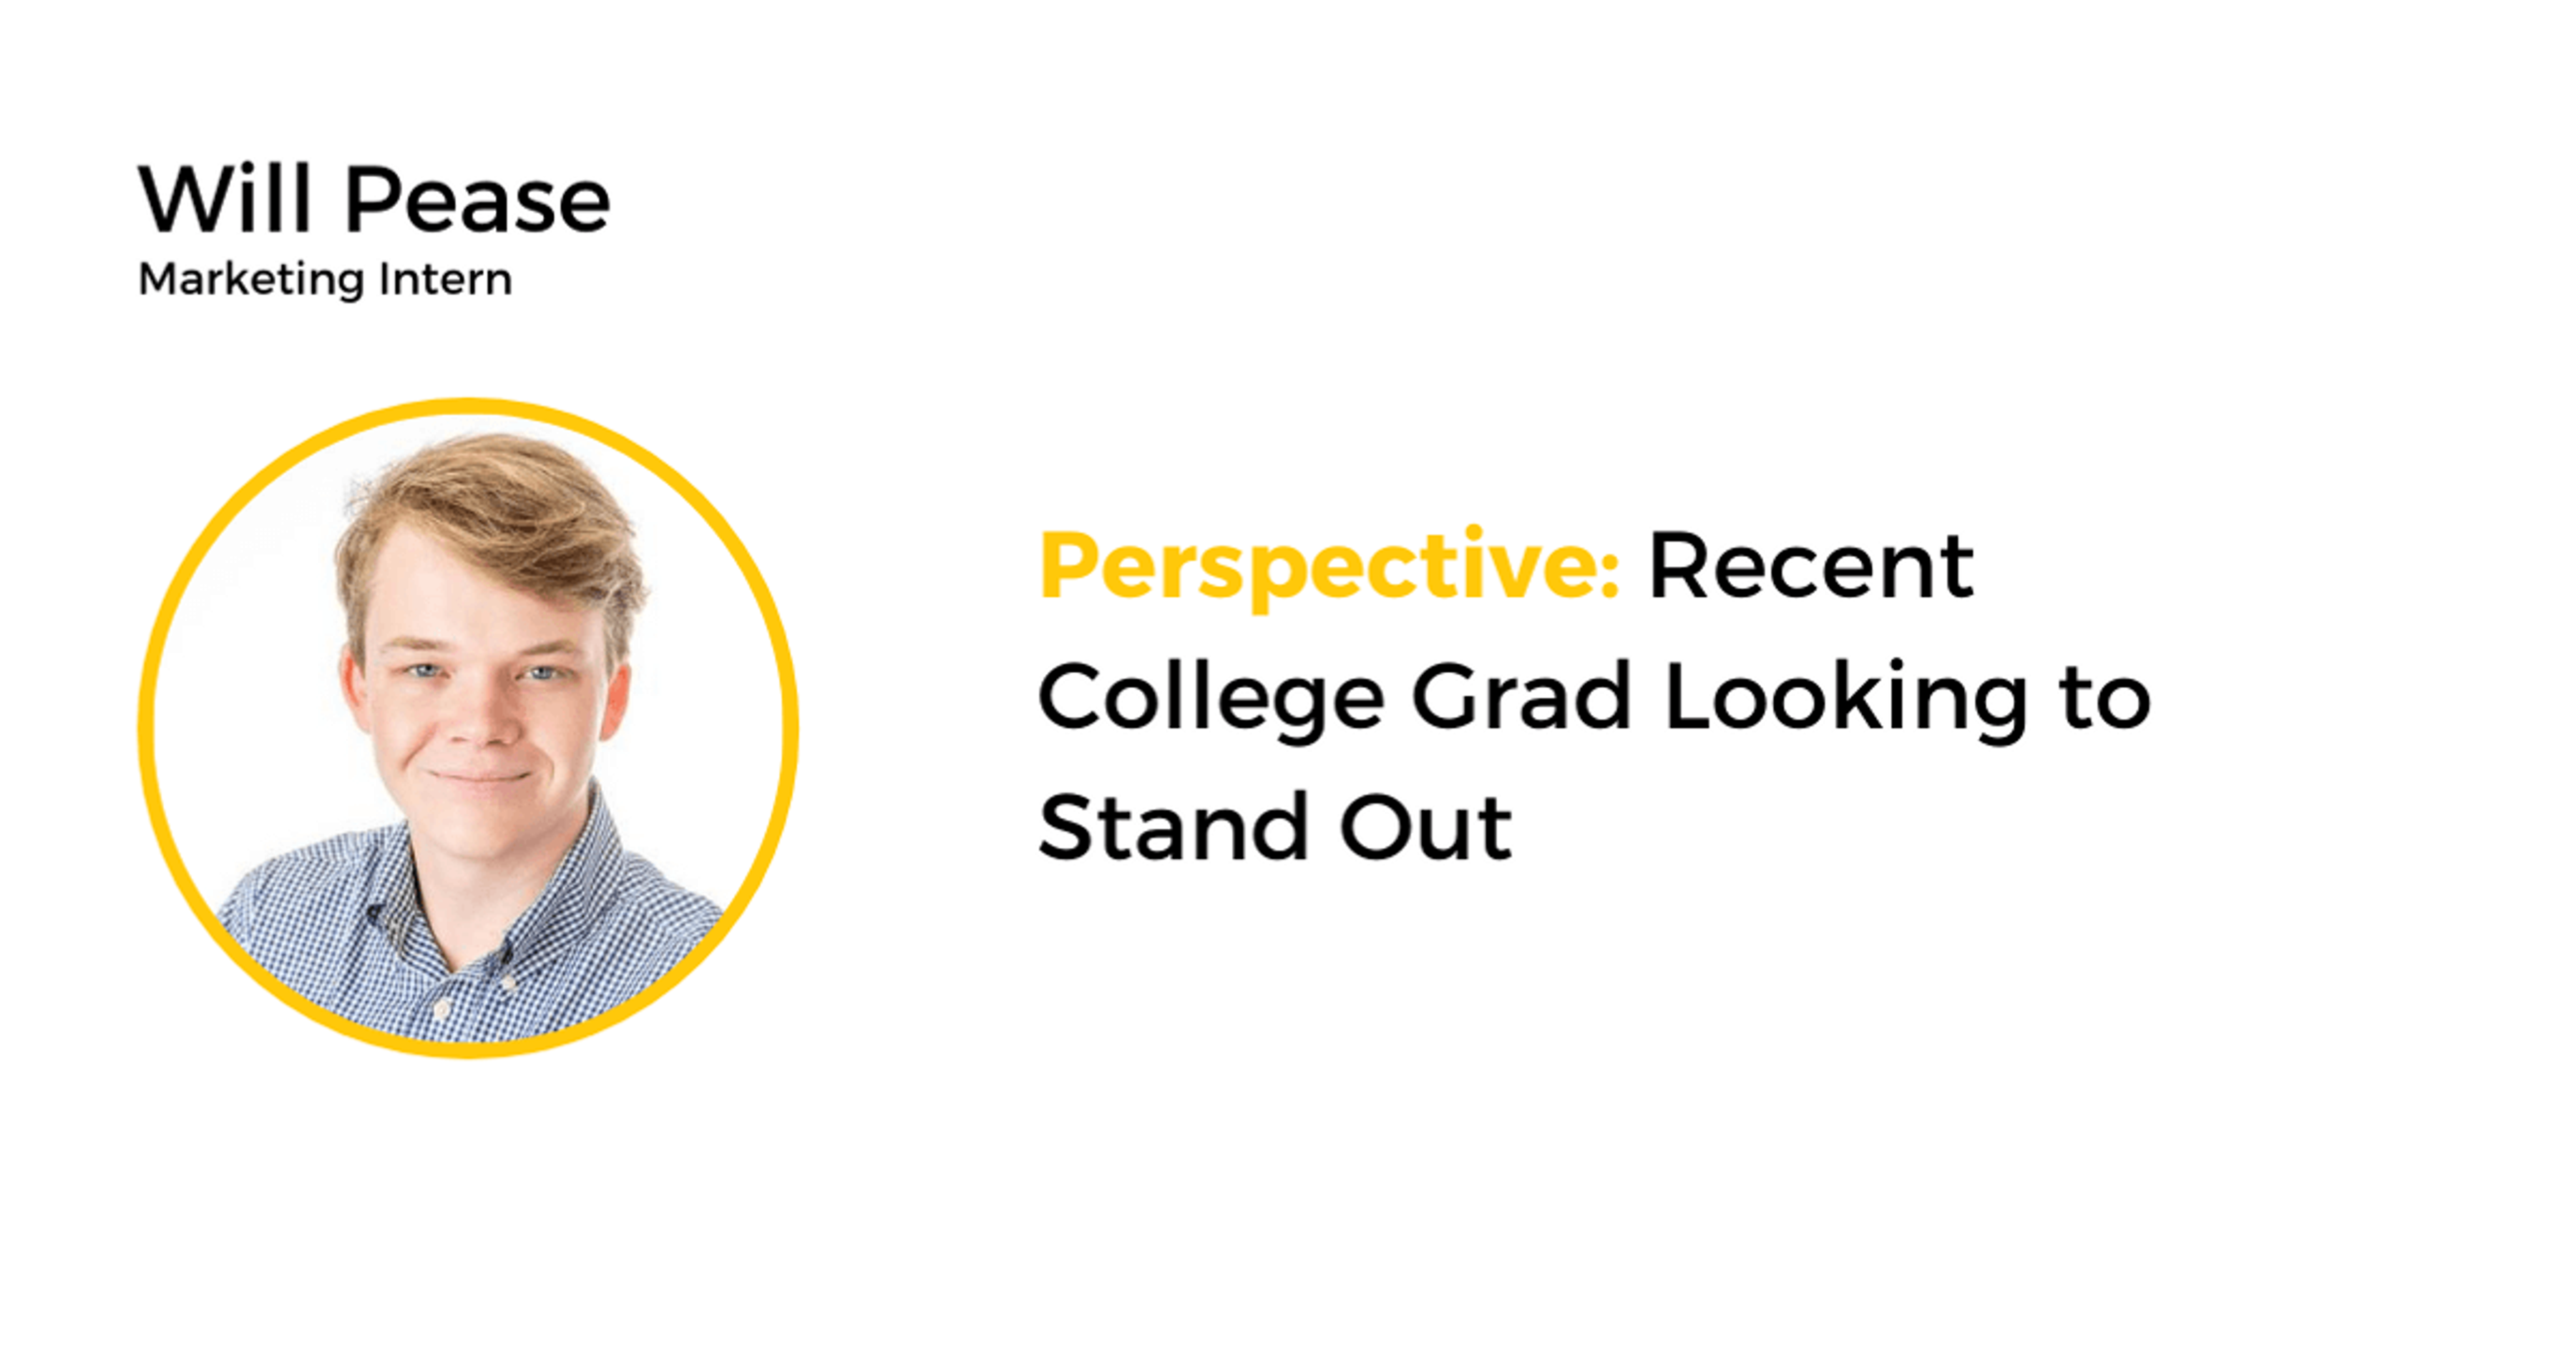 Will Pease, marketing intern, shares his perspective on looking to stand out as a recent college grad.